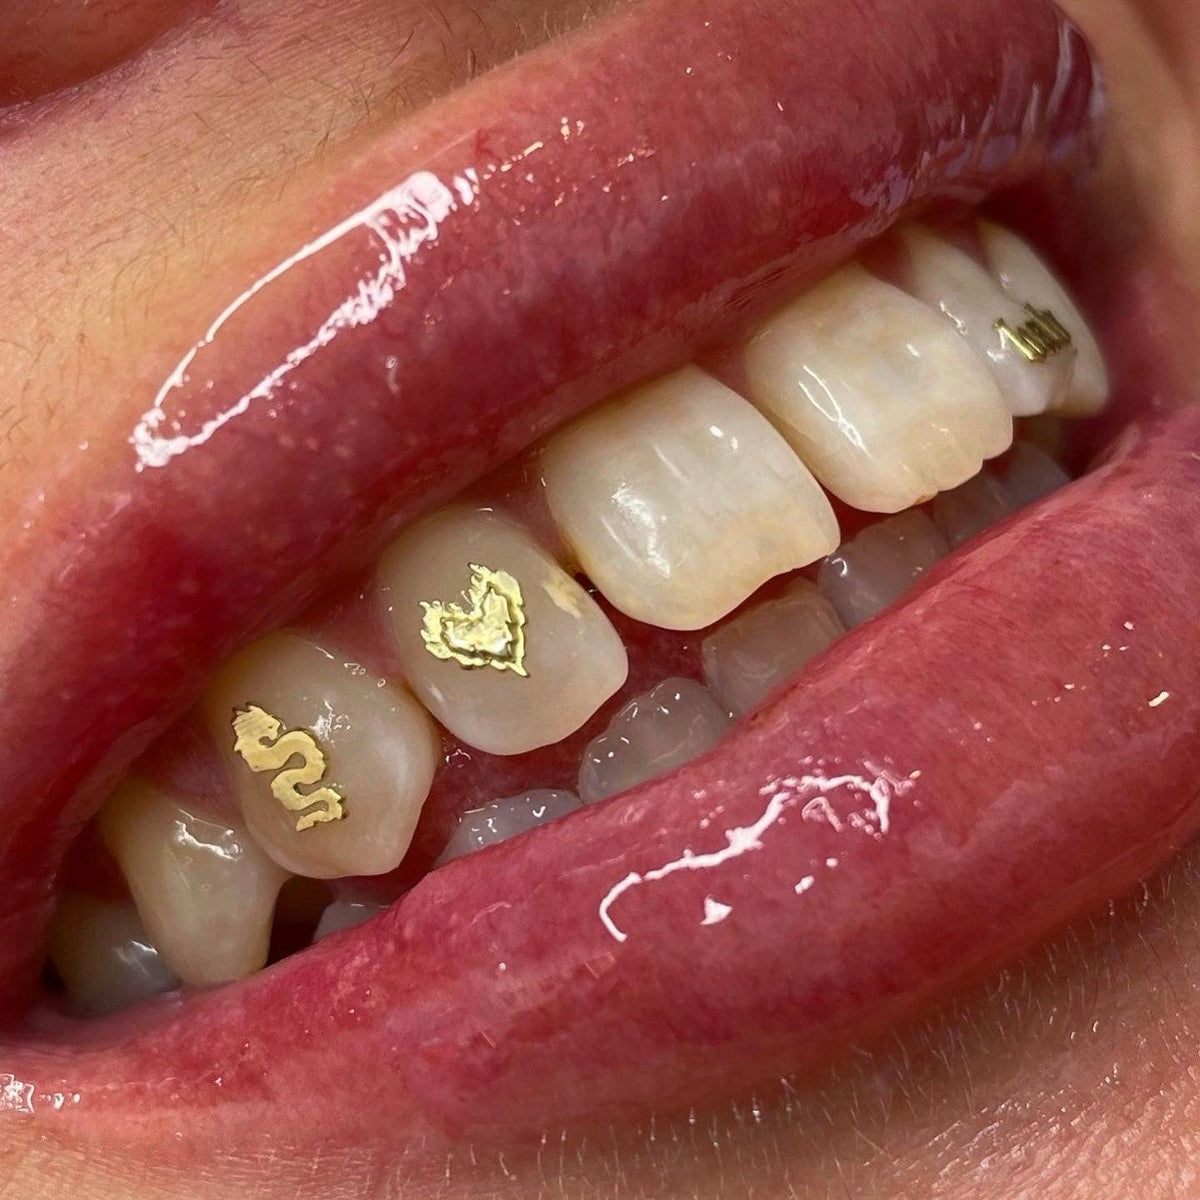 Dental tooth gems, sparkles and gold tooth jewelry? So much choice we have!